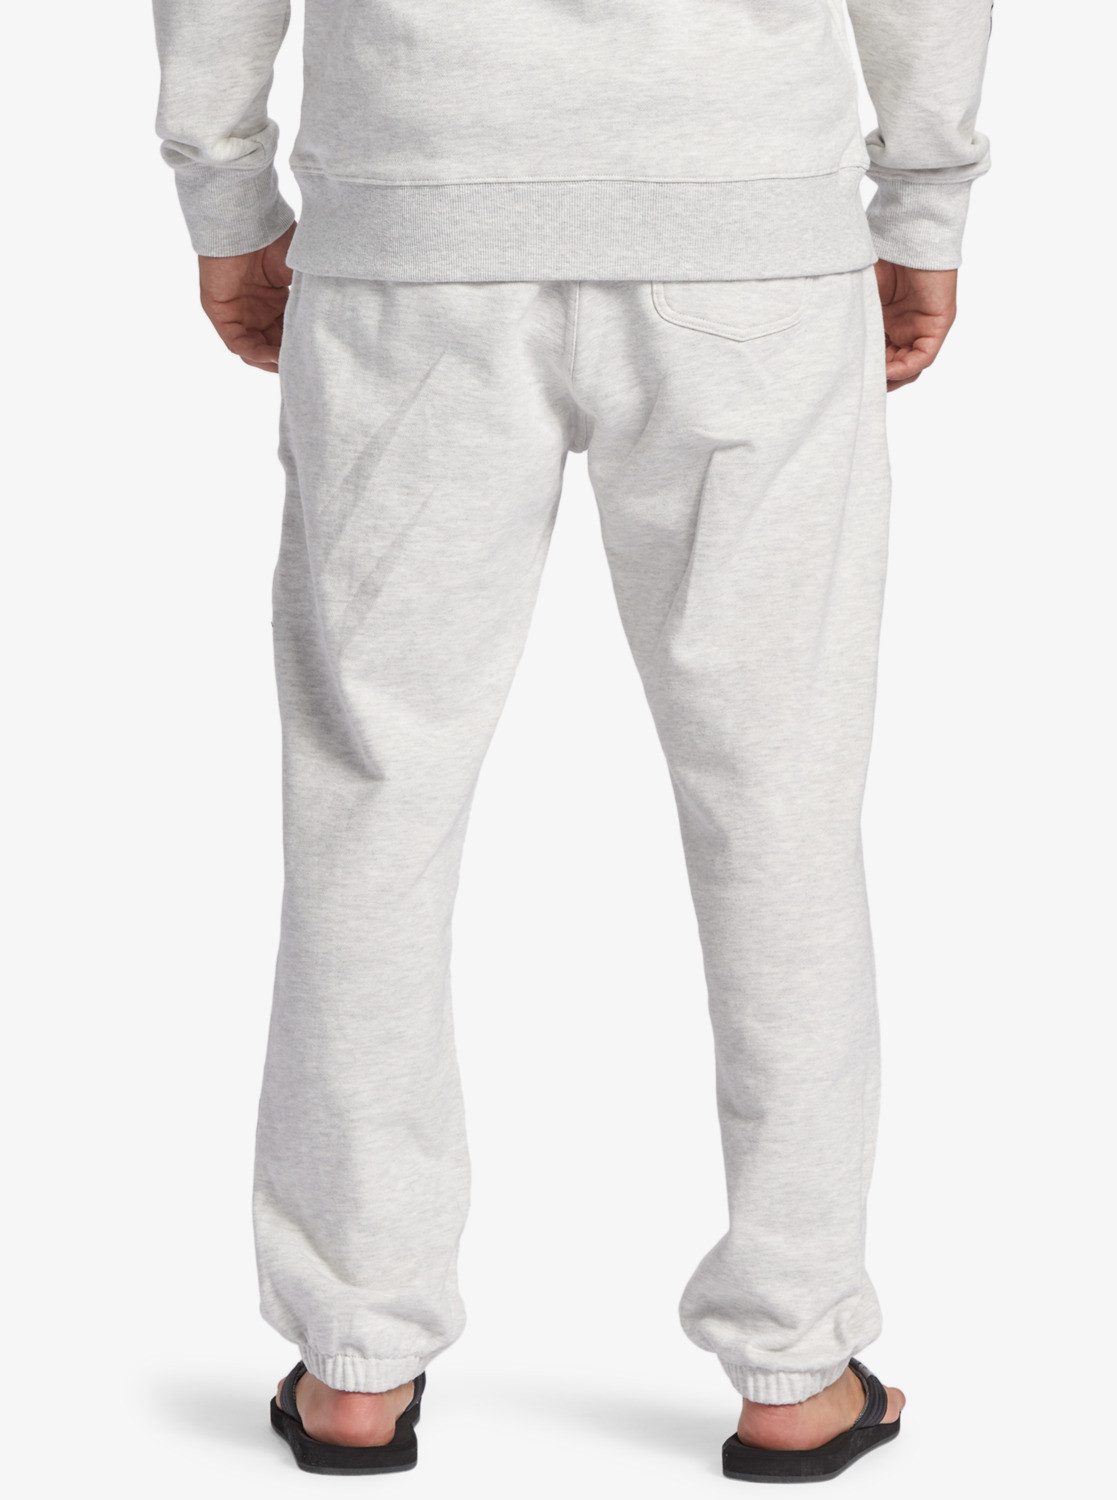 Heather The Pants White Quiksilver Original Marble Jogger